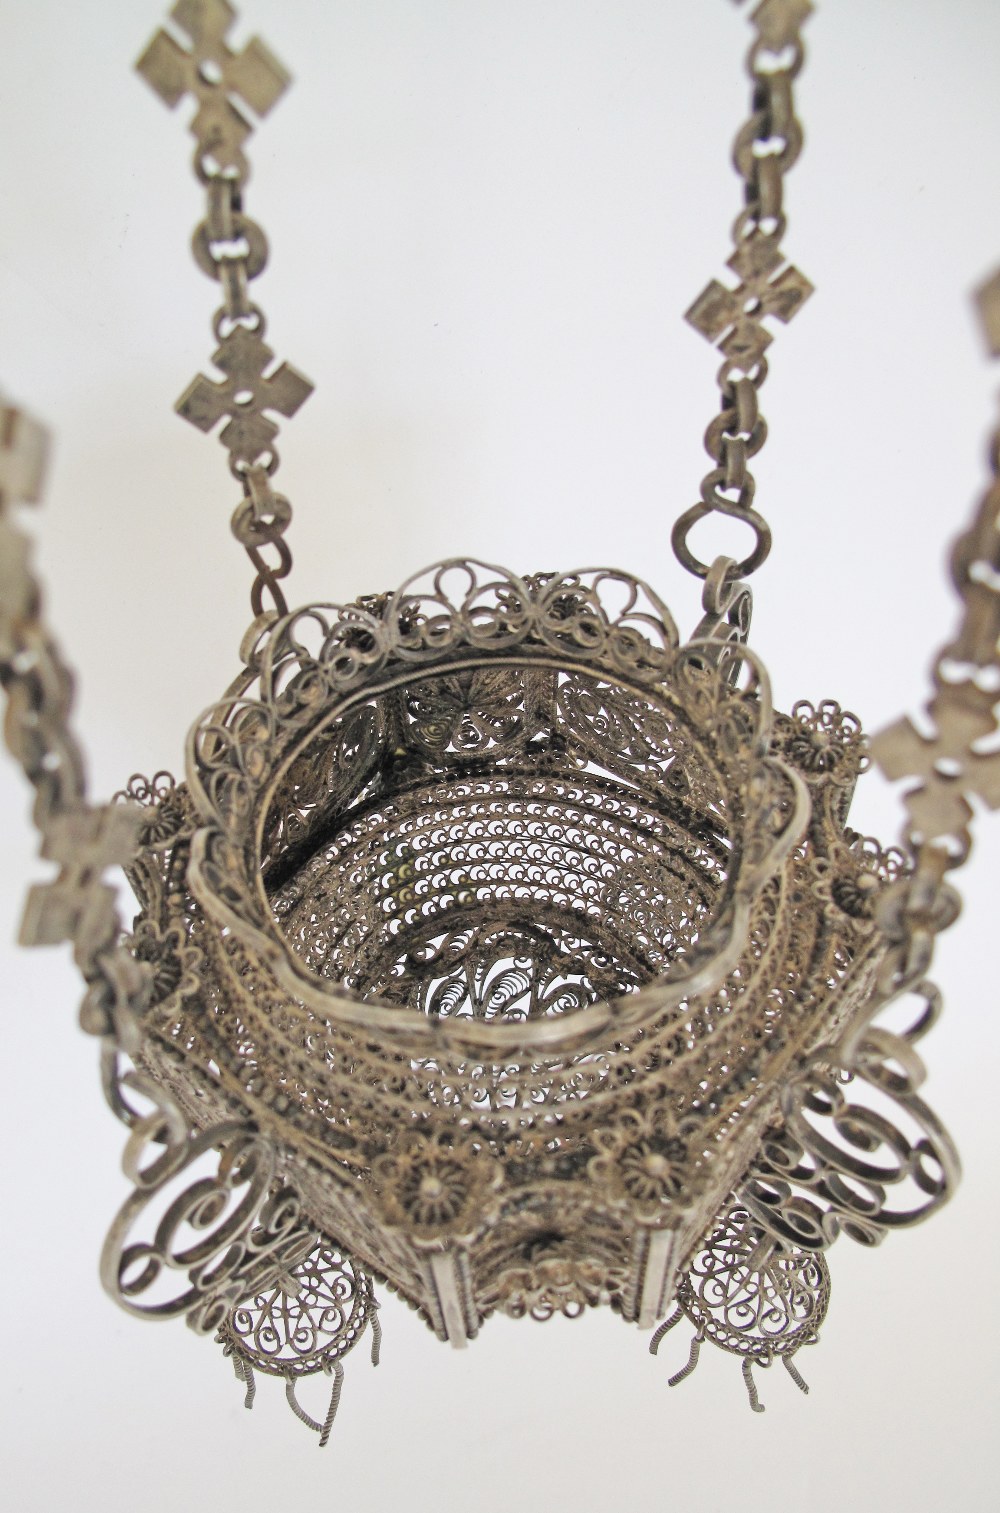 An Orthodox silver votive hanging lamp with filigree decoration. C18th / 19th century. H60cm, - Image 8 of 9